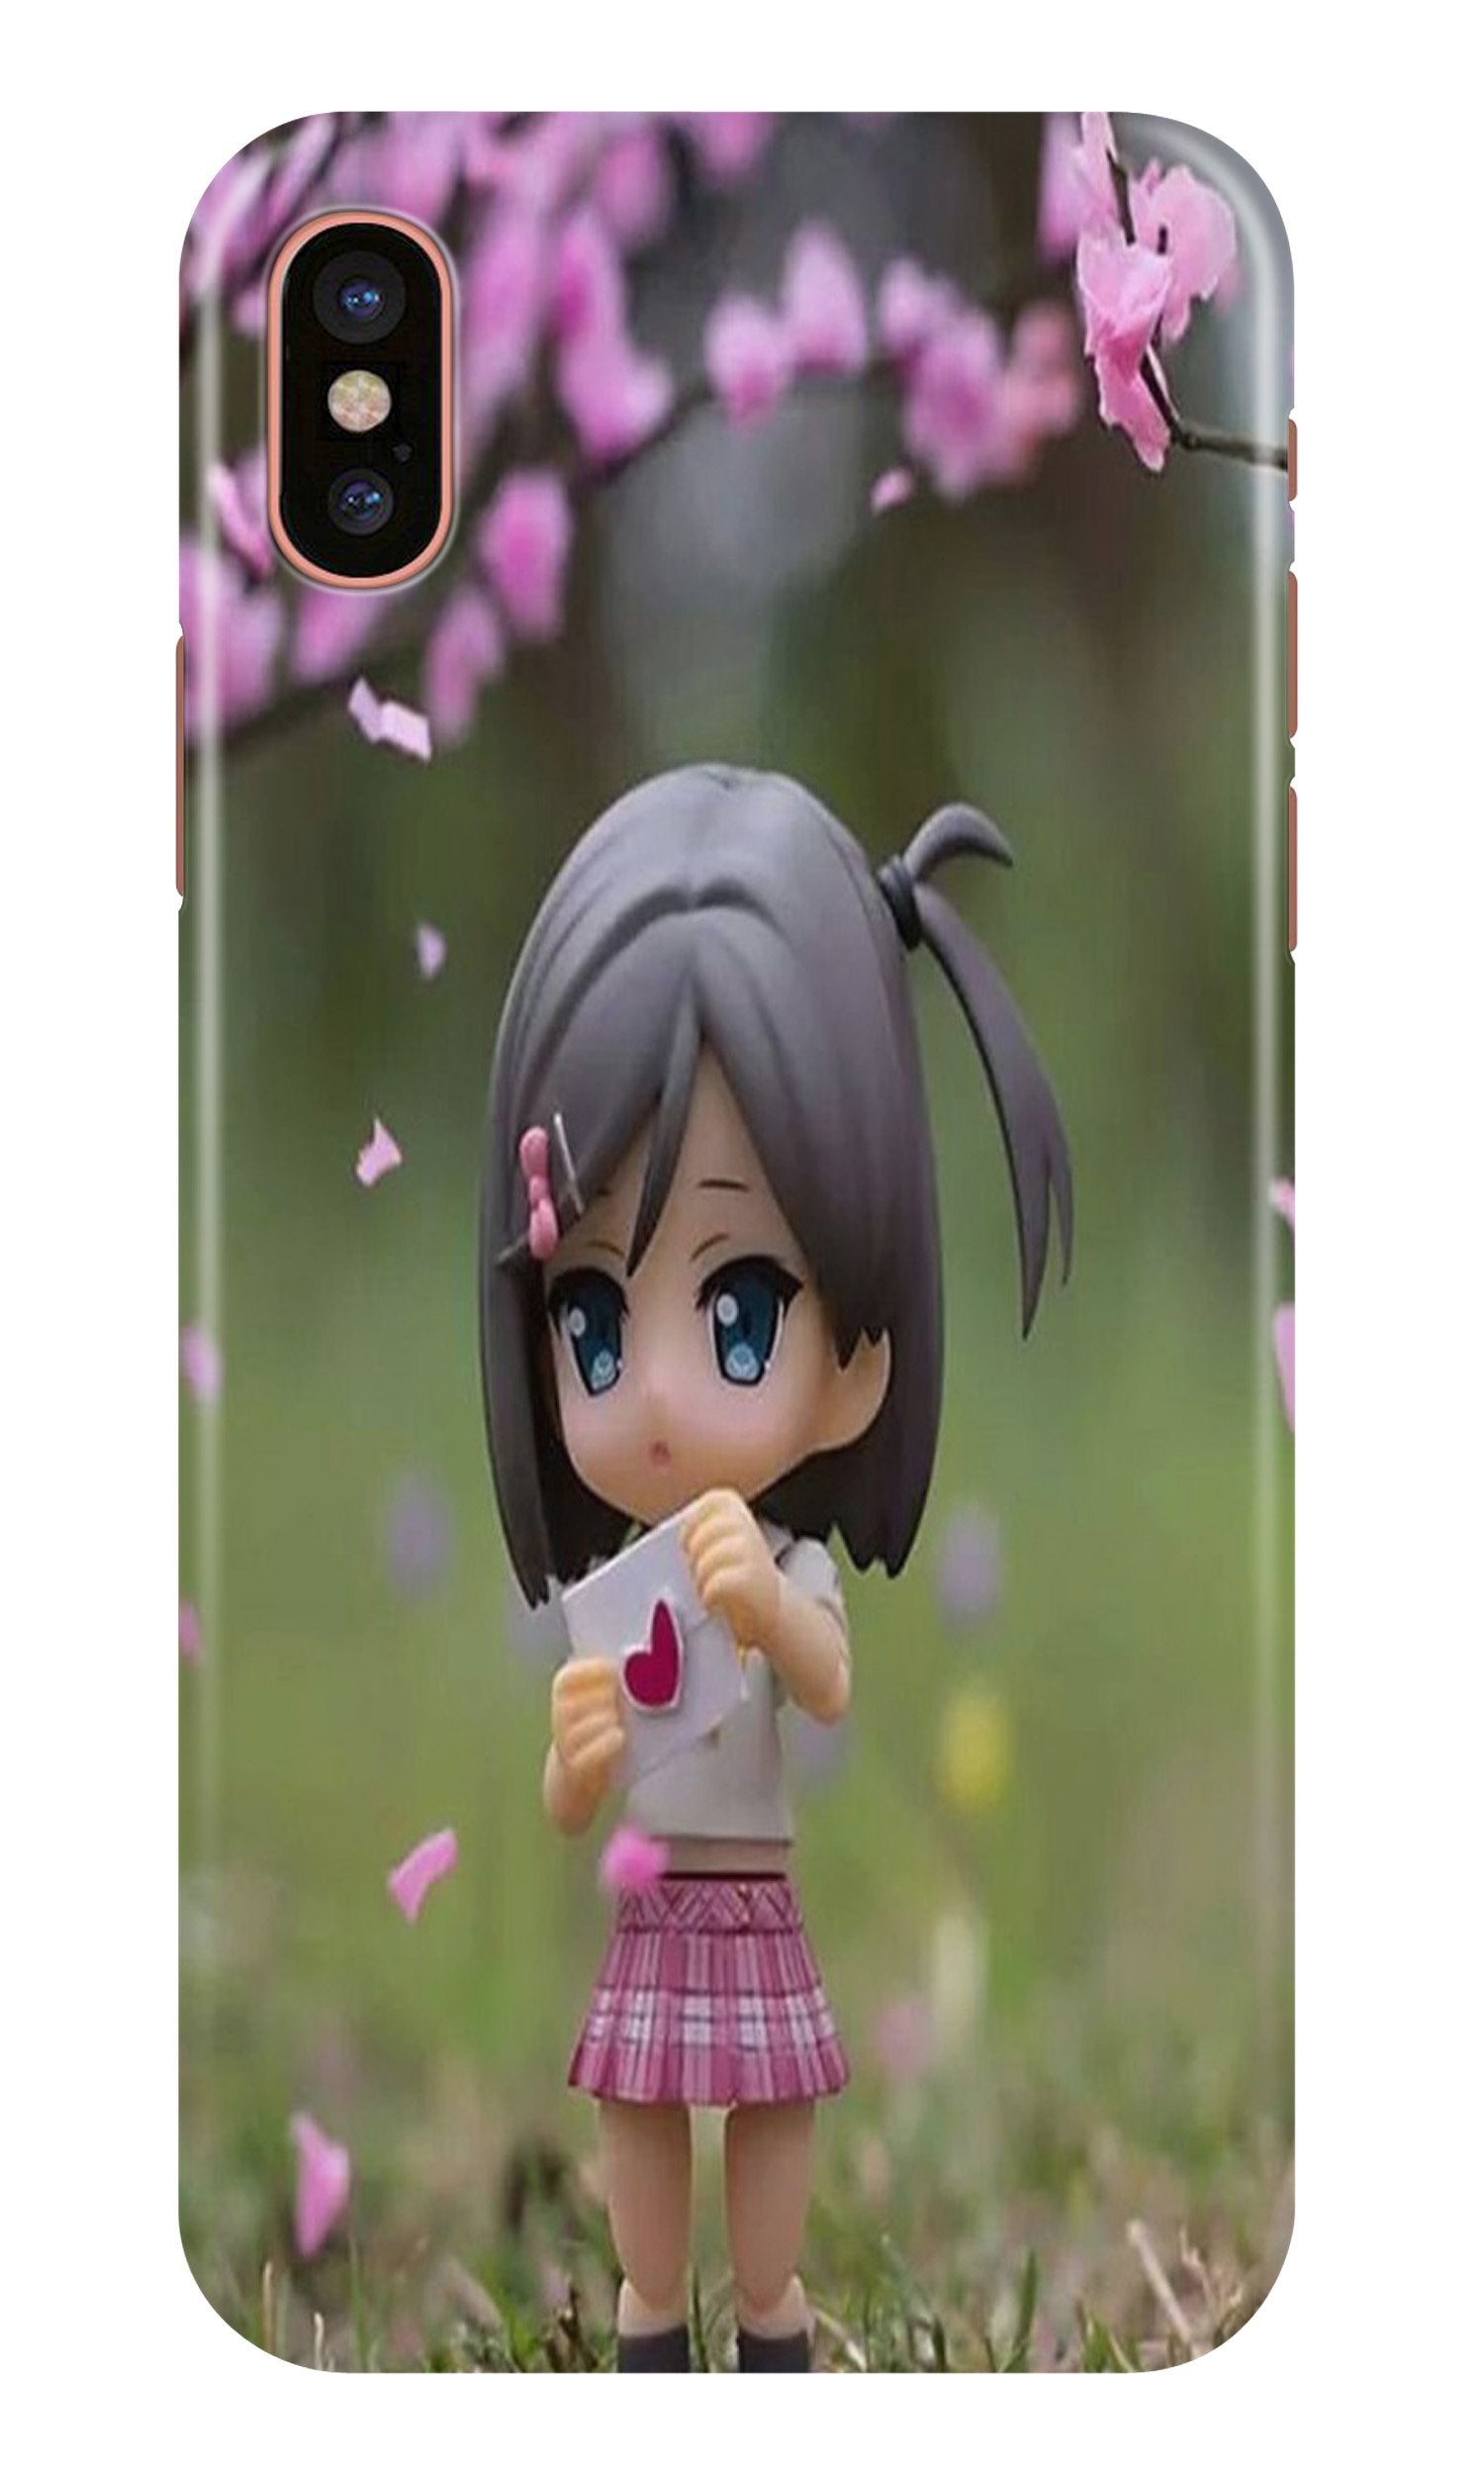 Cute Girl Case for iPhone X